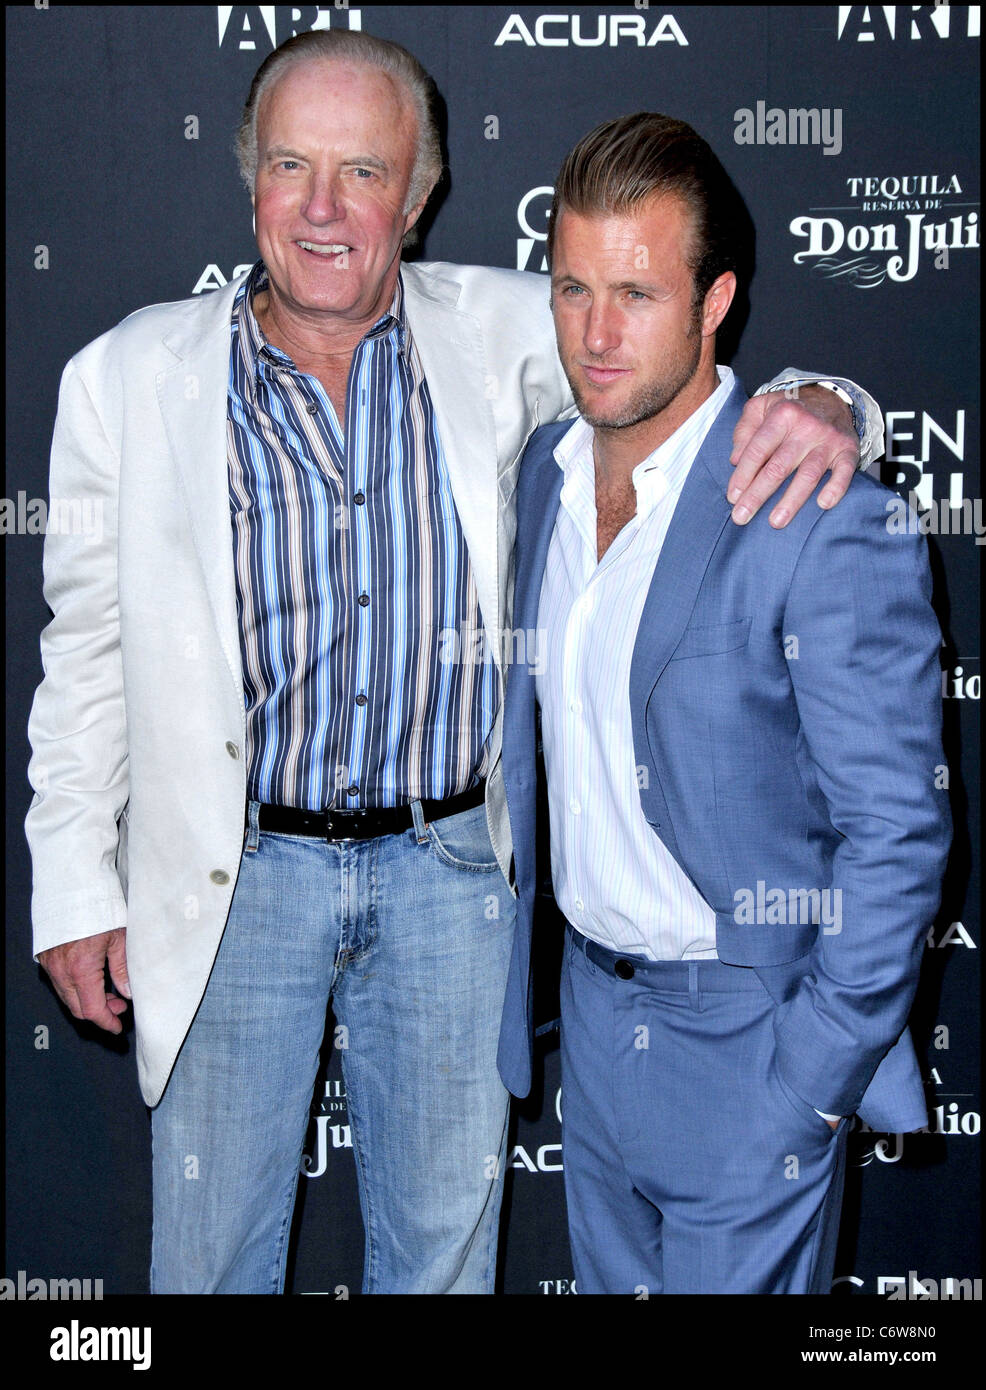 James Caan with his son Scott Caan Los Angeles Premiere of 'Mercy' held at the Egyptian Theatre Hollywood, California - Stock Photo